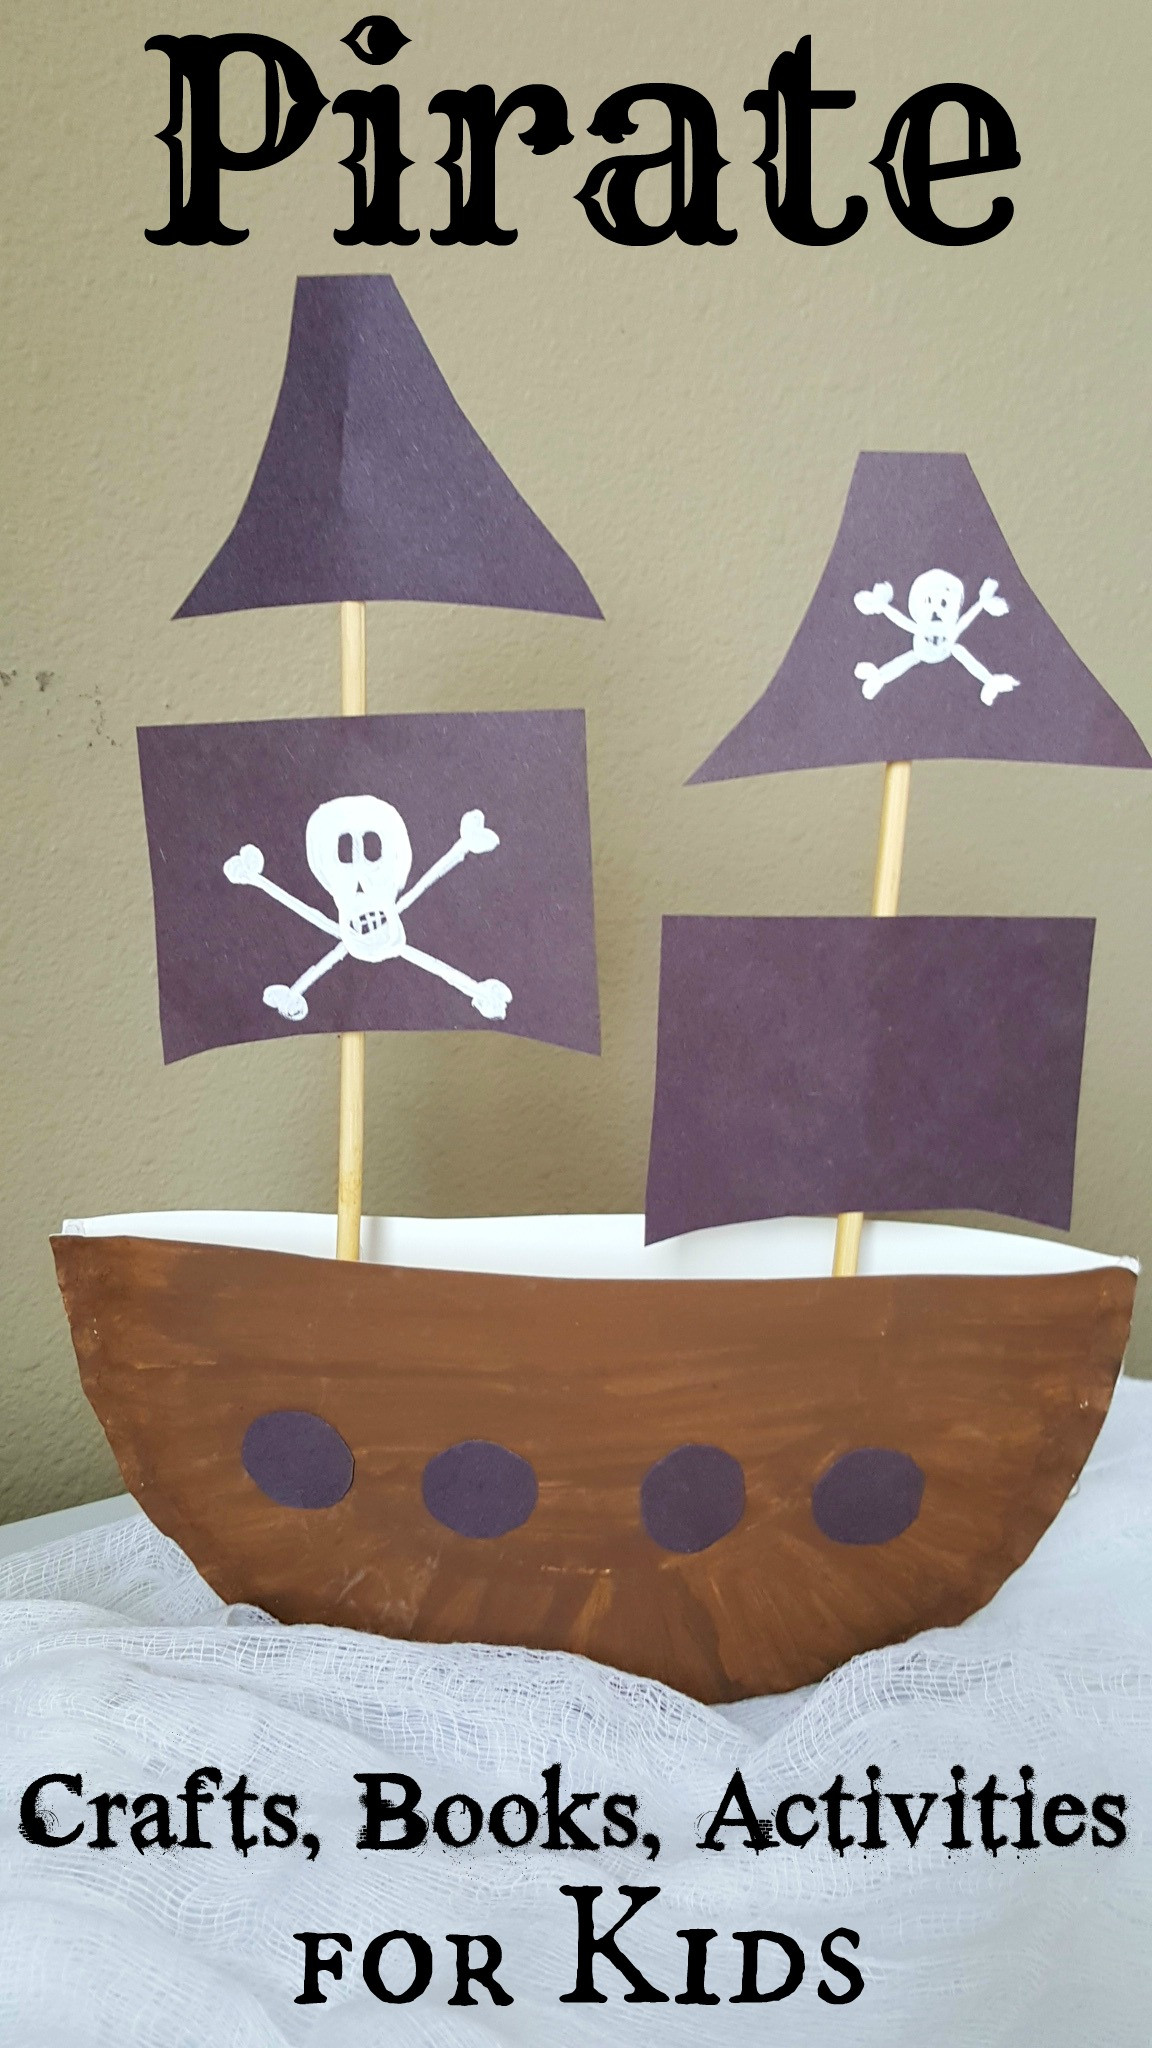 Pirate Crafts For Kids
 Pirate Ship Paper Plate Craft 3D Project for Kids